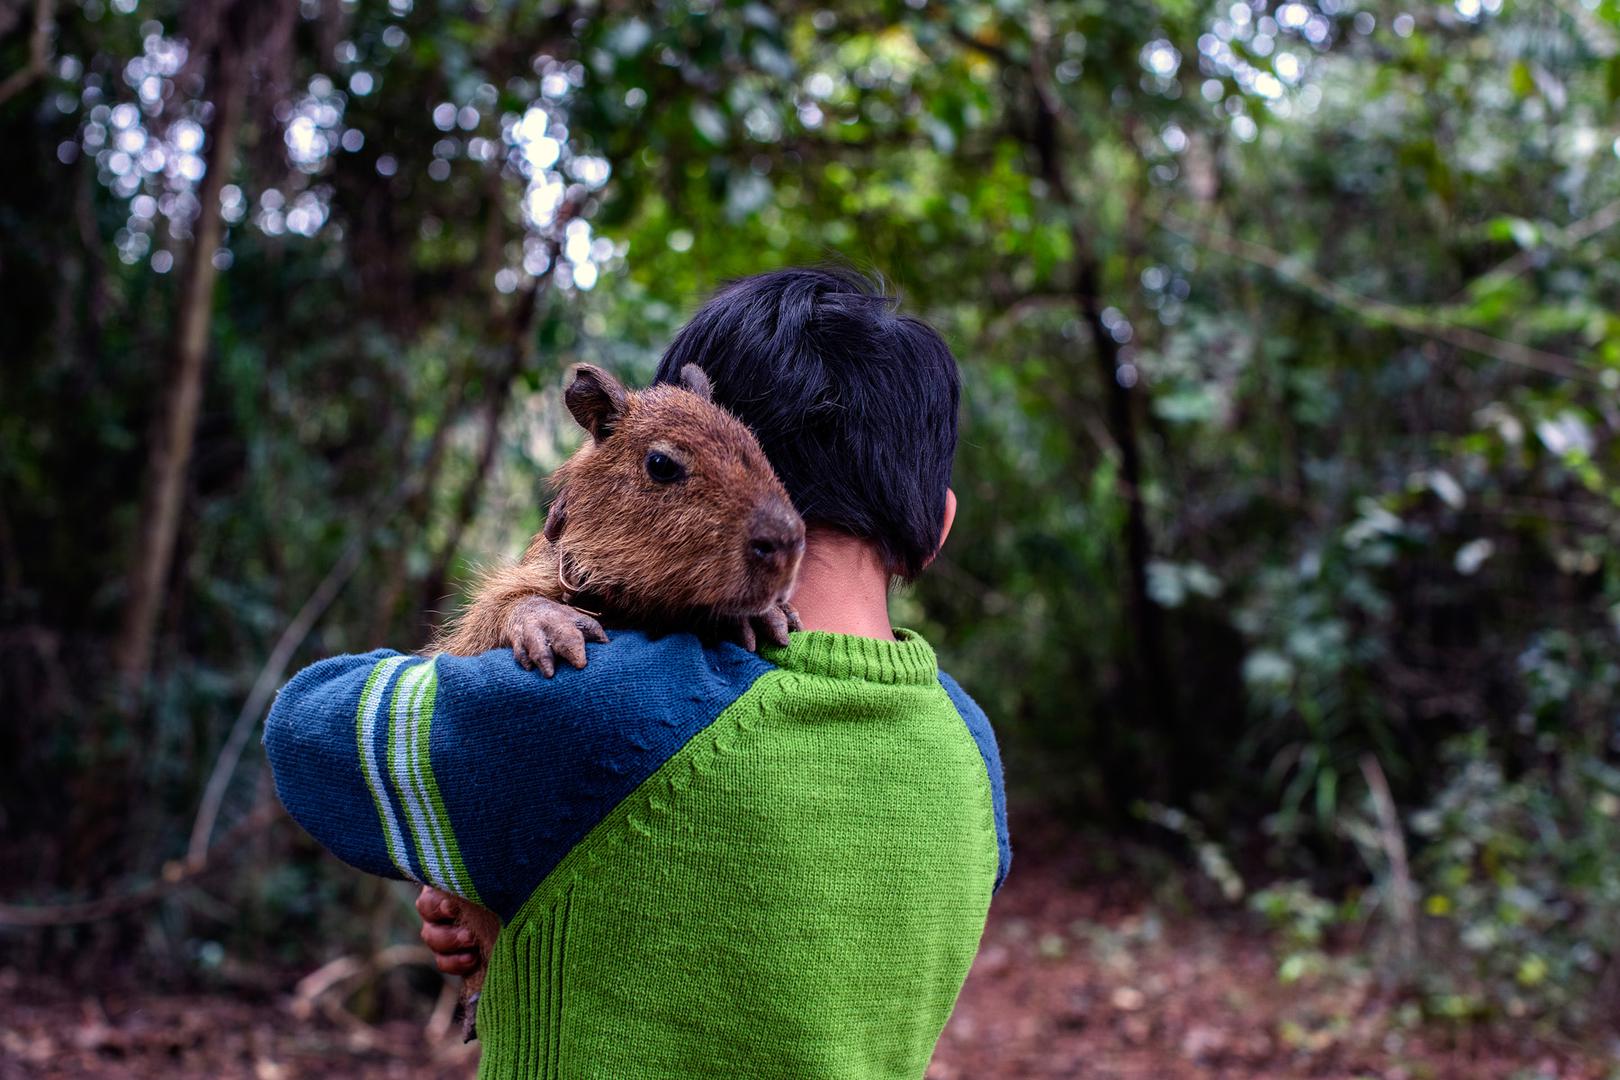 Aratiri, a 9-year-old boy, lives in an indigenous community in the state of Mato Grosso do Sul affected by pesticides